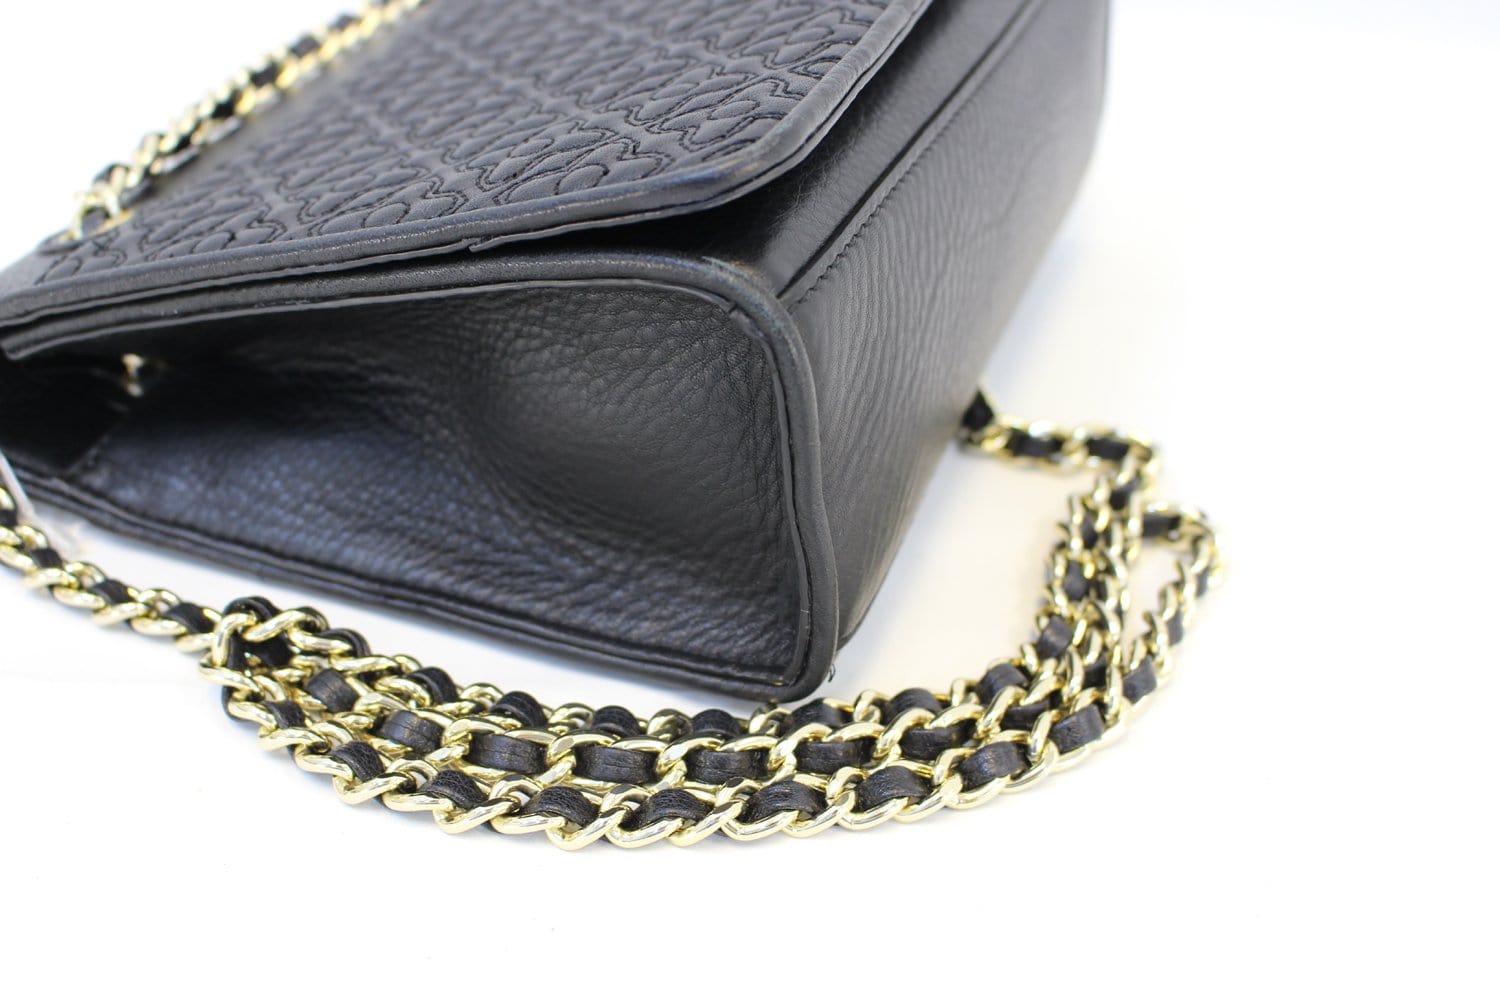 Tory Burch Black Leather Quilted Crossbody Gold Hardware Top Zip Bag